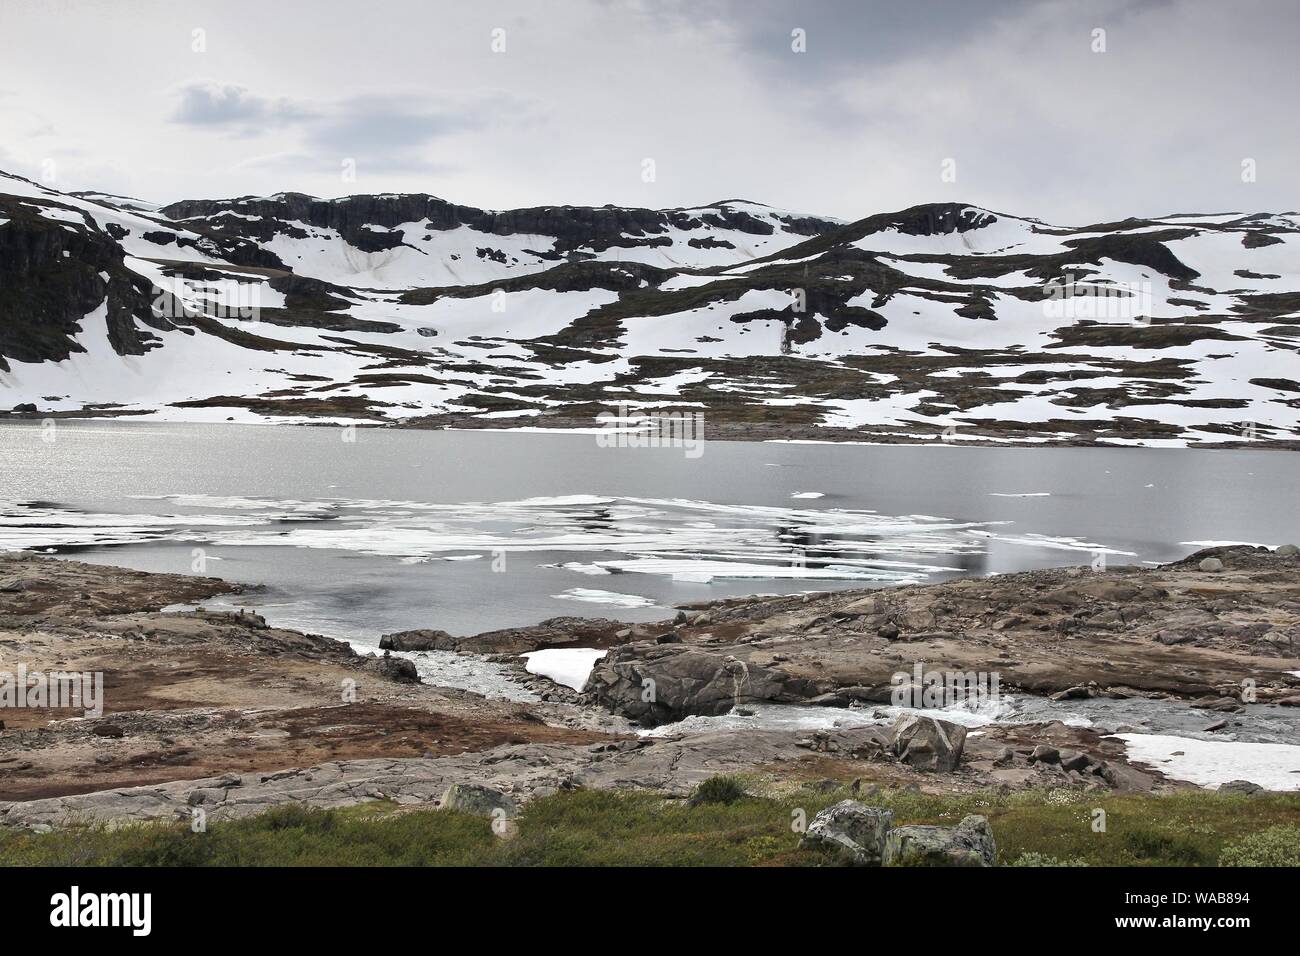 Norway landscape - Hallingskarvet mountains with snow and ice in summer. July view. Stock Photo